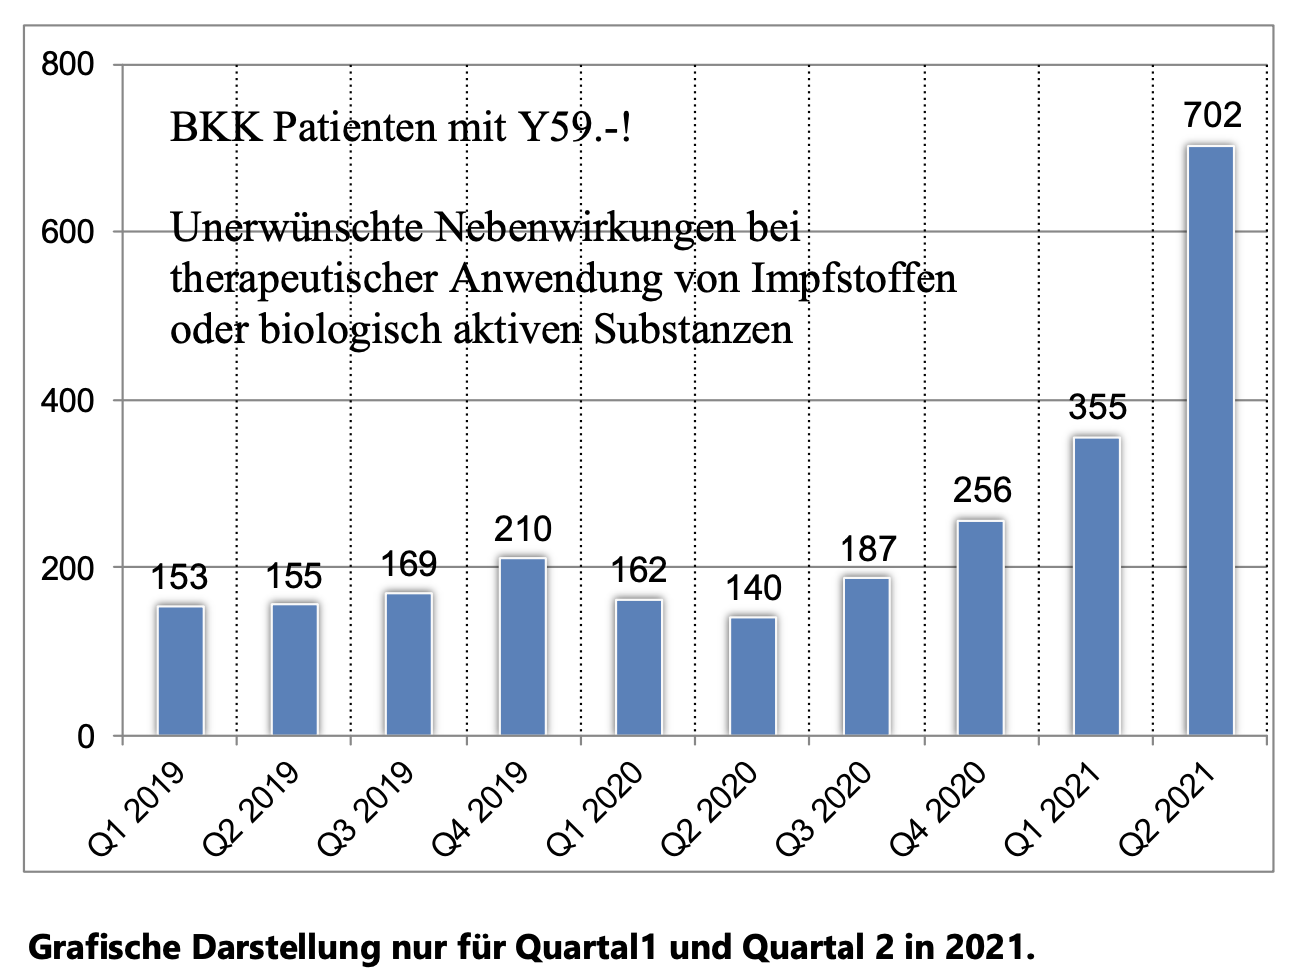 Graph for Q1 and Q2 in 2021: BKK Press Release